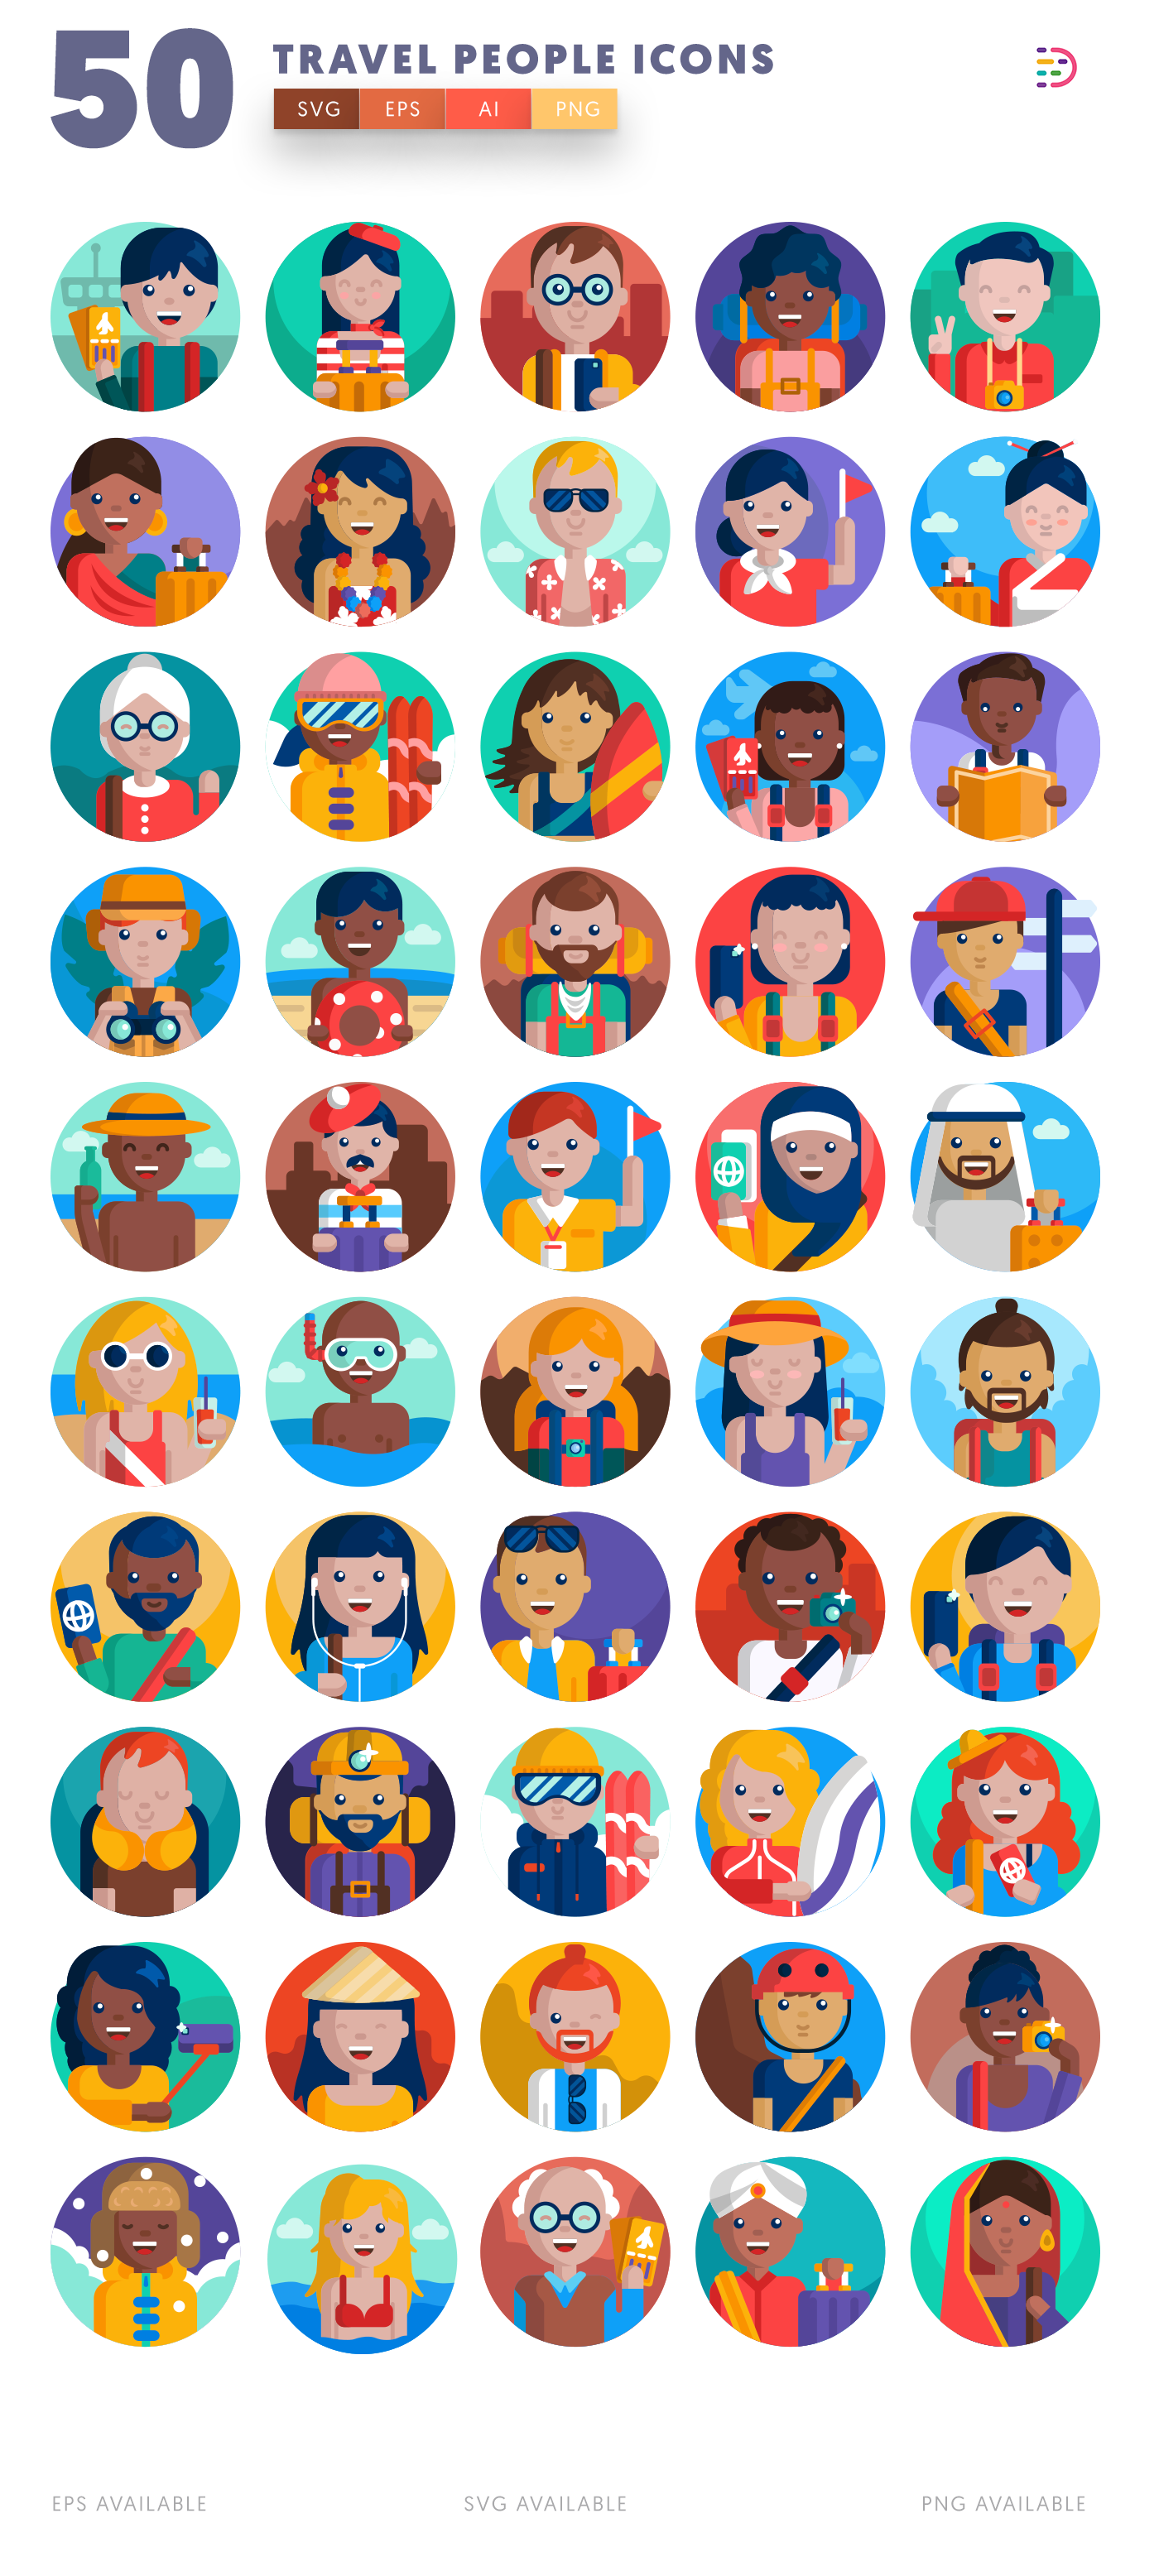 Design ready Travel People Icons